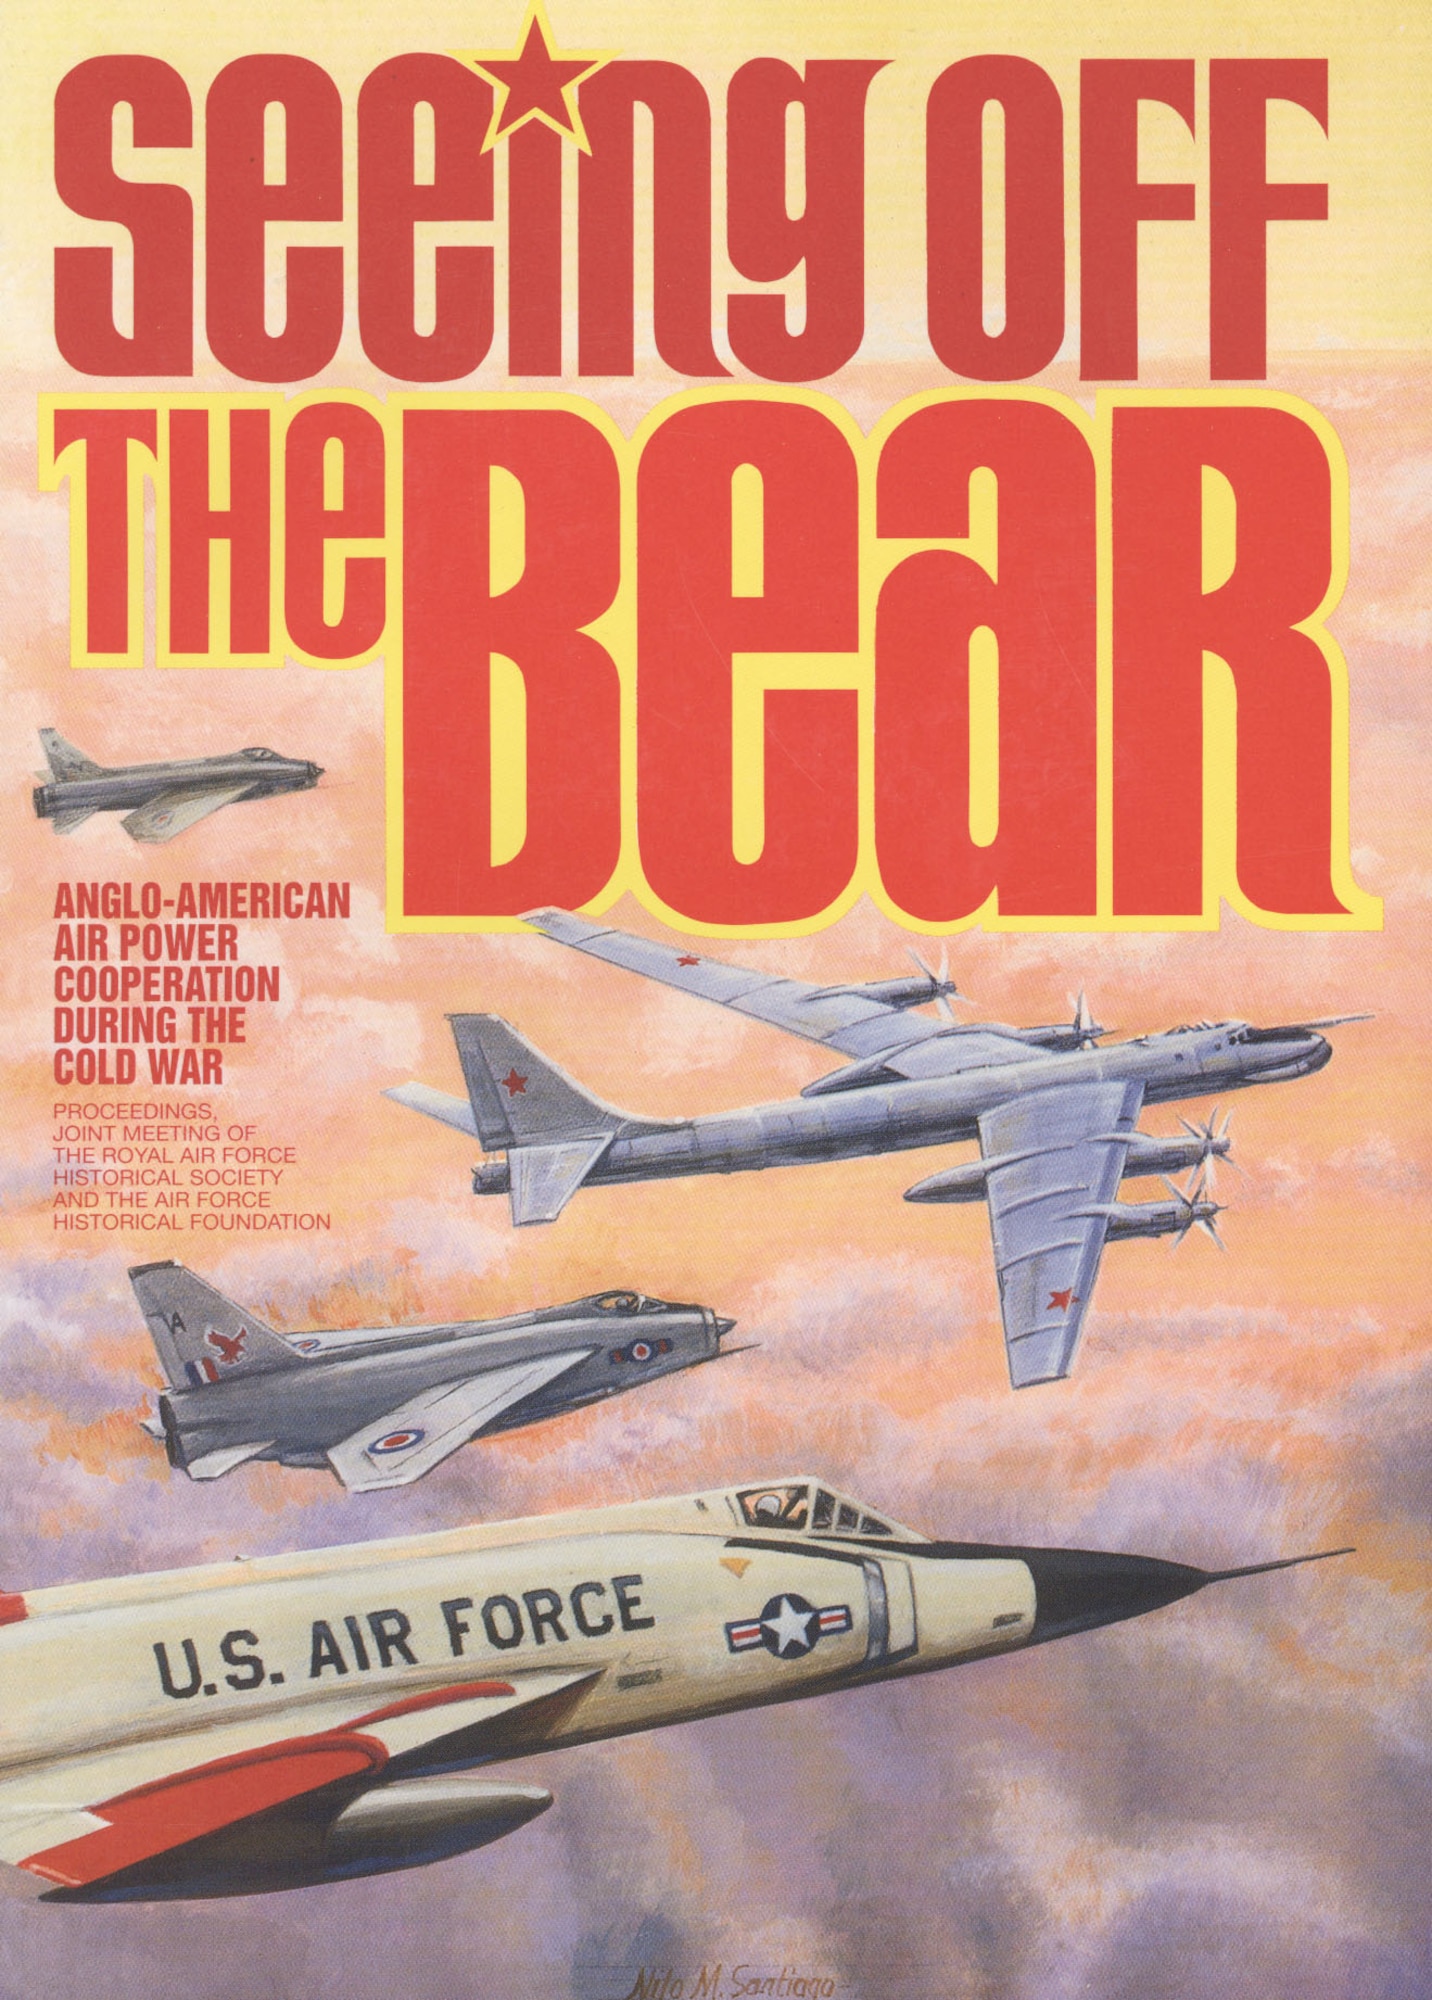 Anglo-American Air Power Cooperation During the Cold War